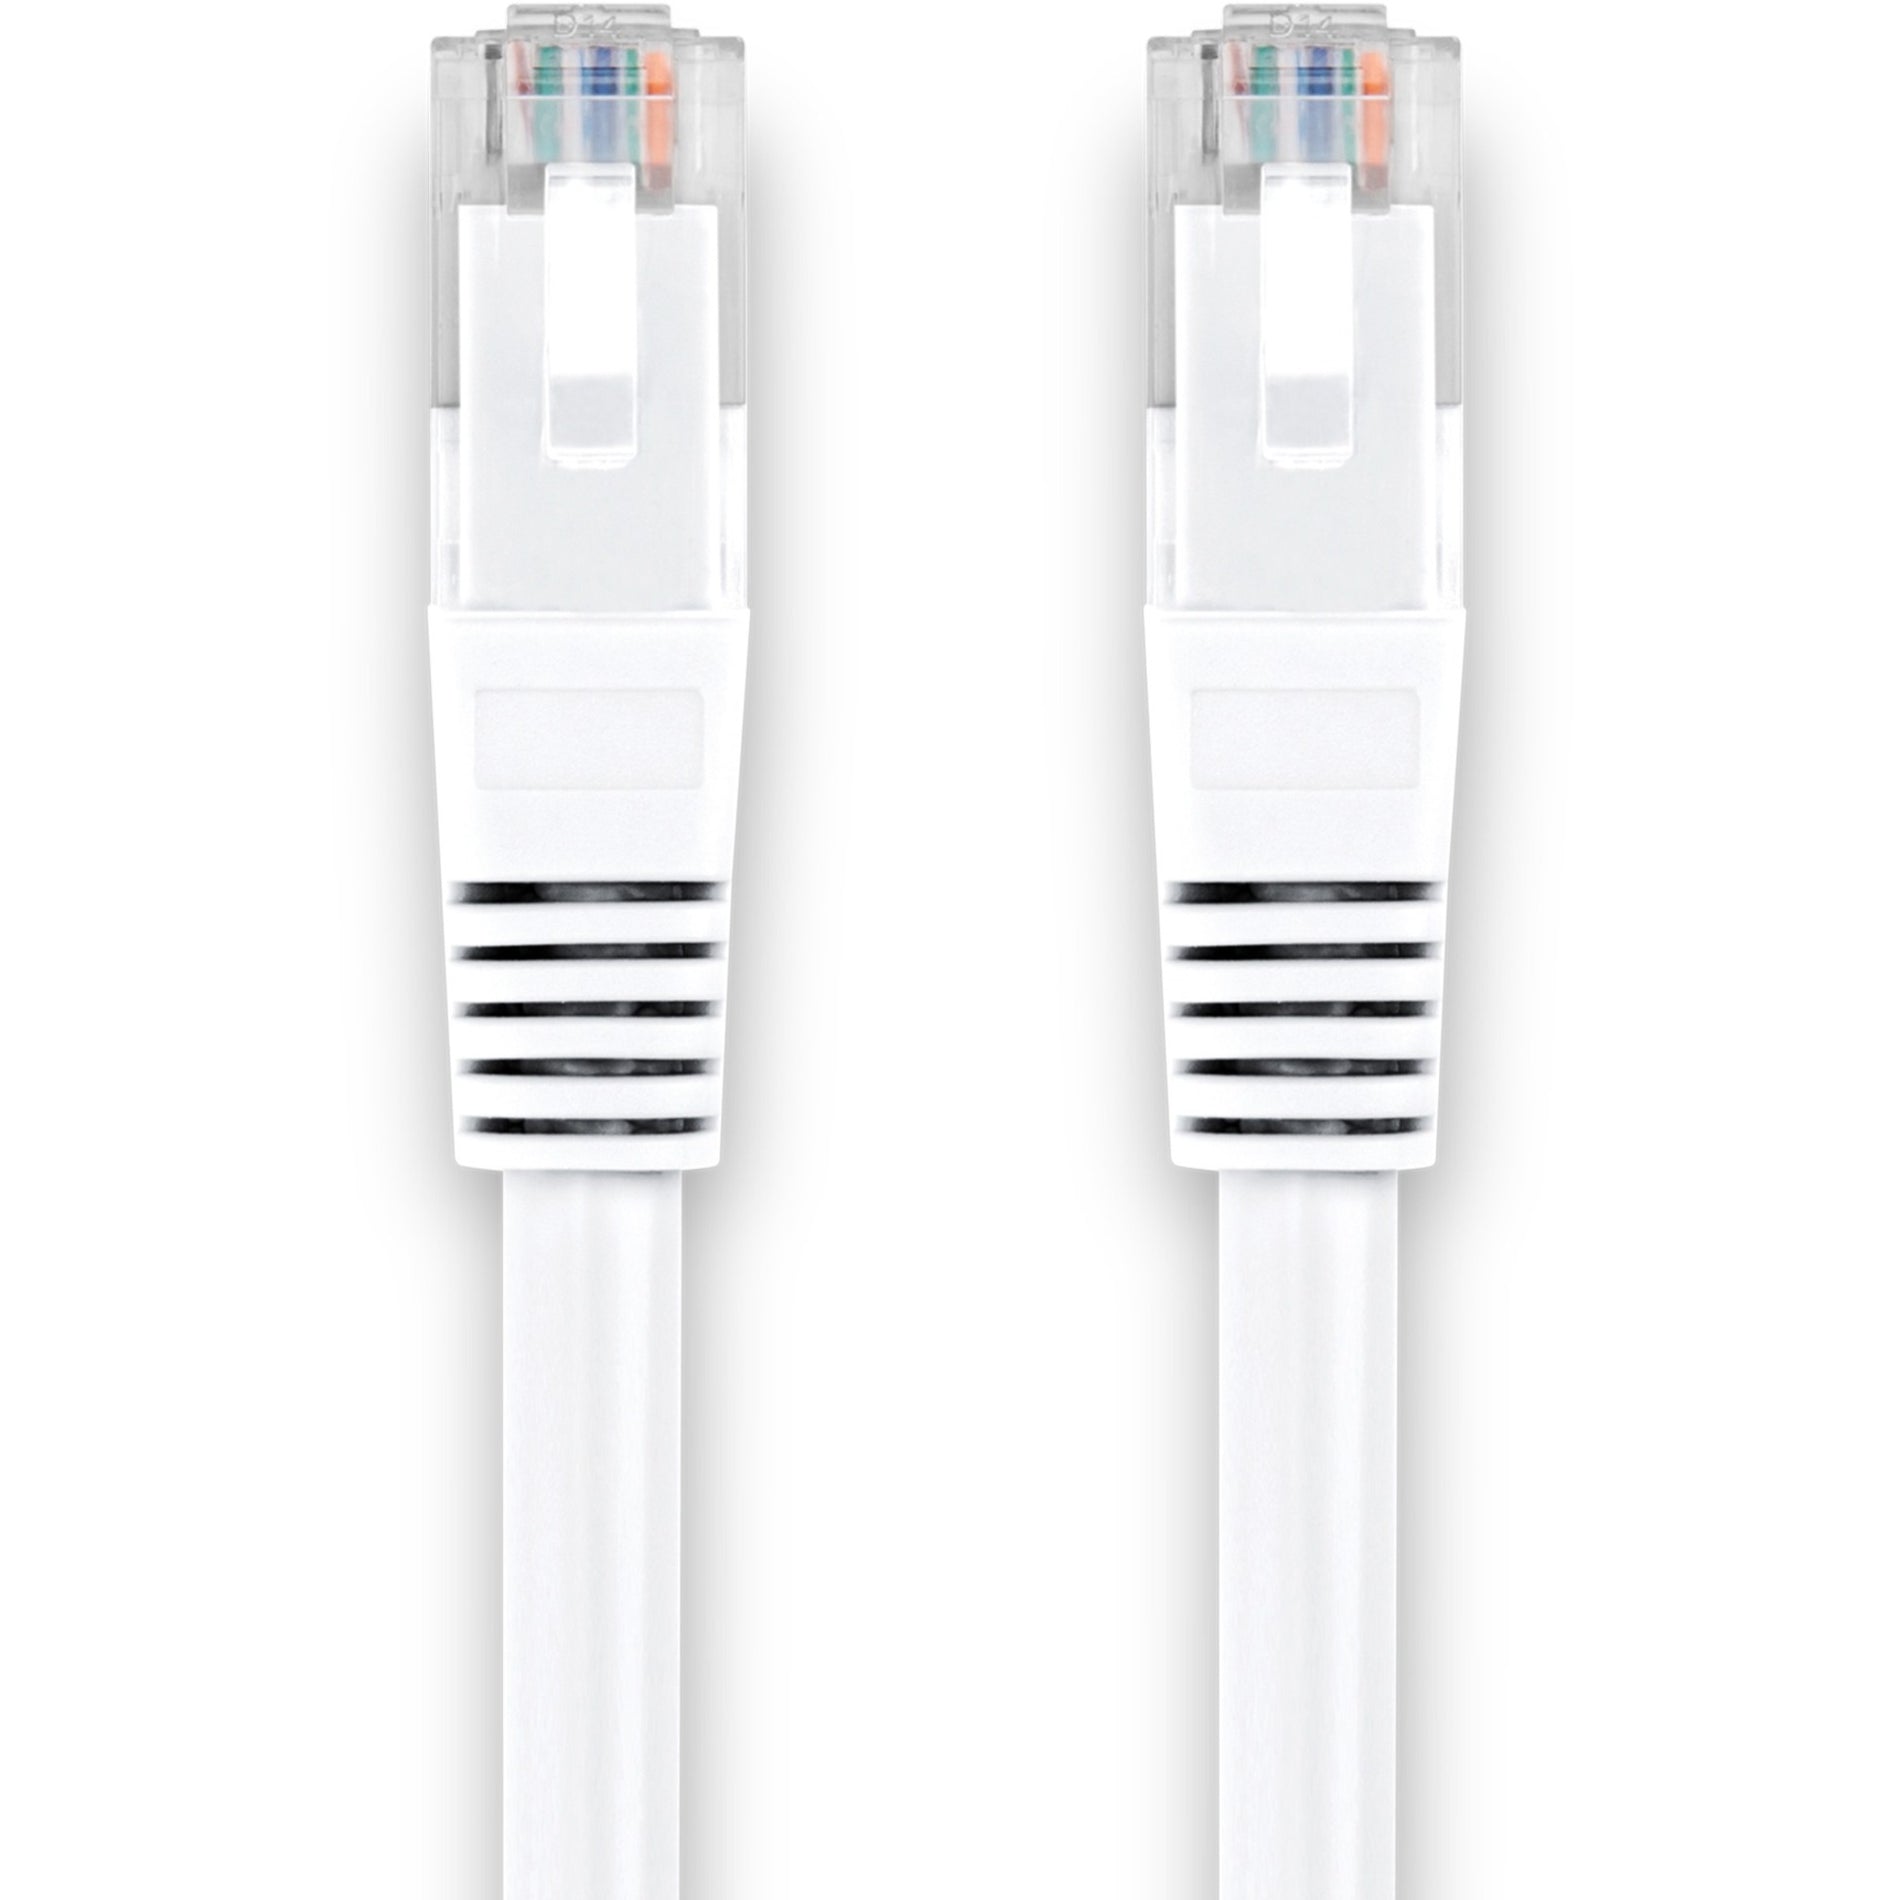 Rocstor Y10C461-WT Cat.6 Network Cable, 50 ft, 10 Gbit/s, PoE, Molded Boot, White